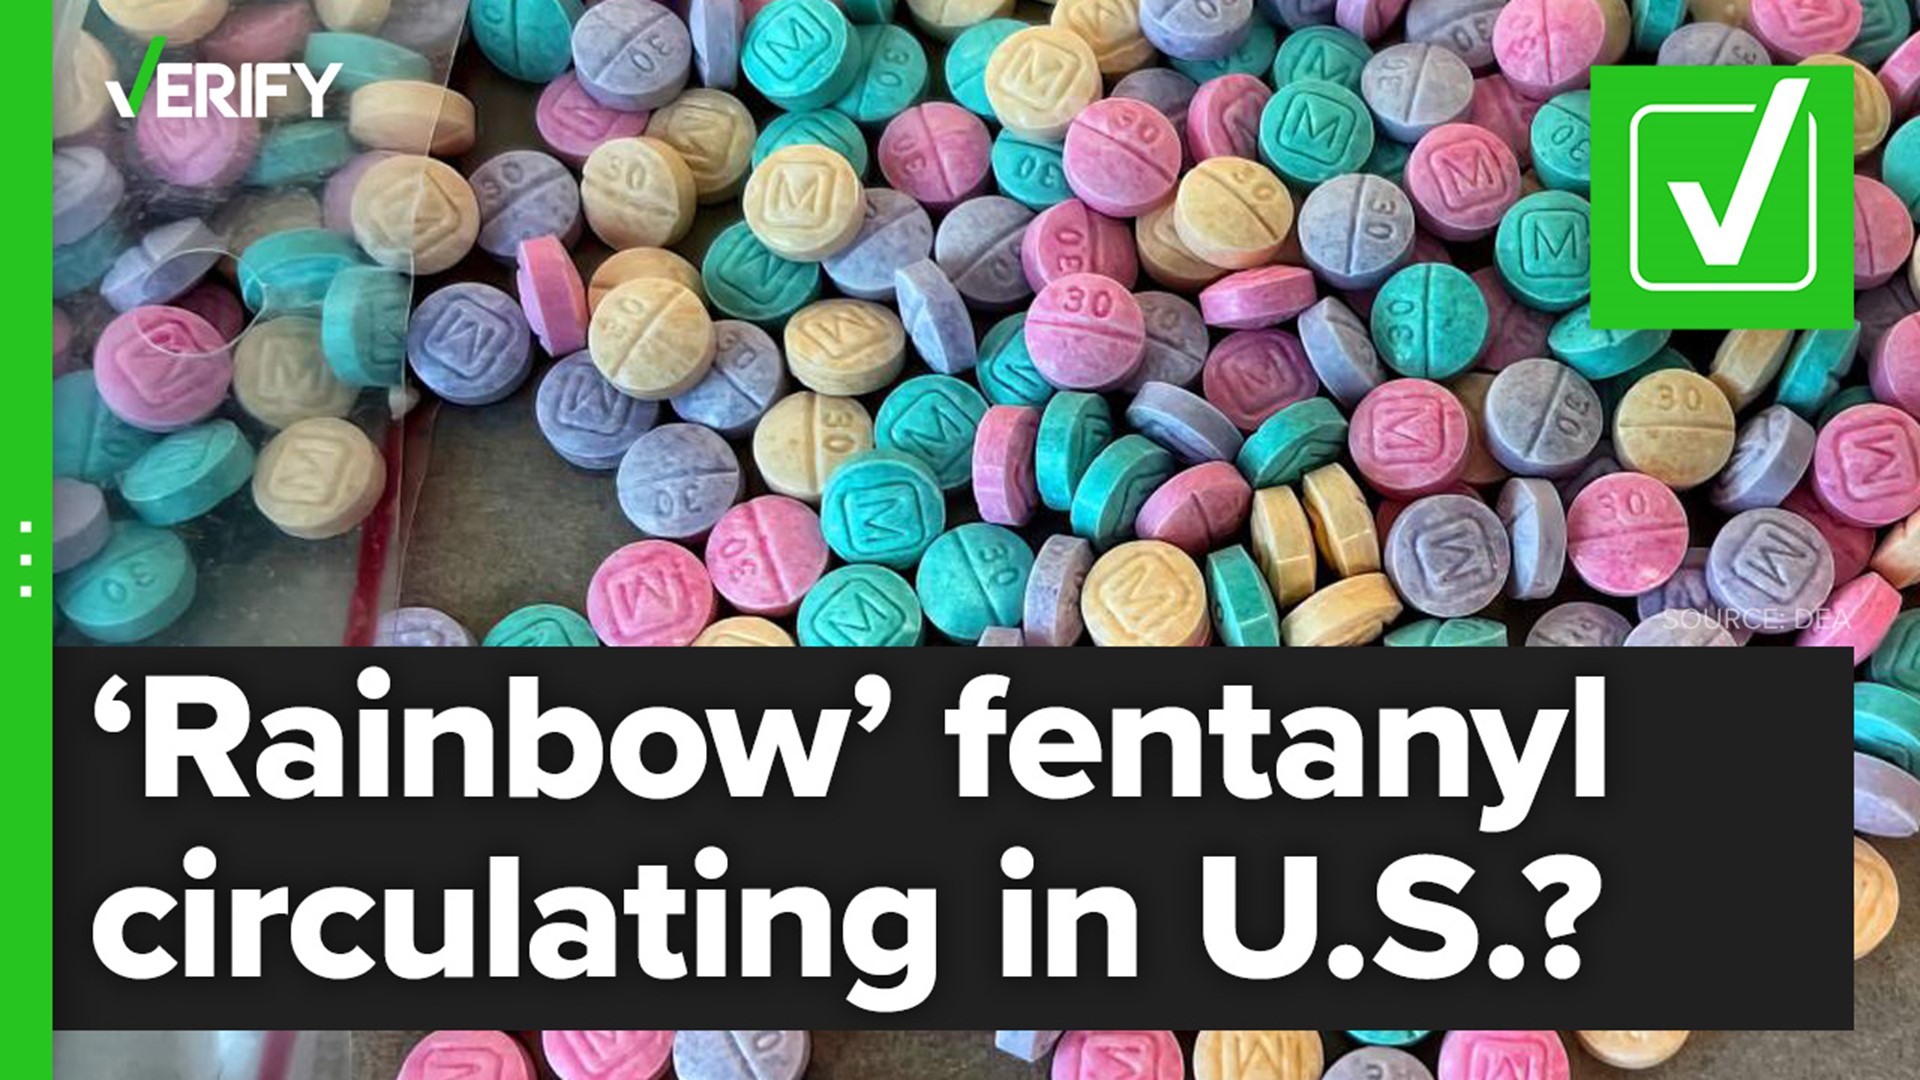 The U.S. Drug Enforcement Administration issued a warning about “rainbow” fentanyl, saying authorities have seized the drug in 21 states.